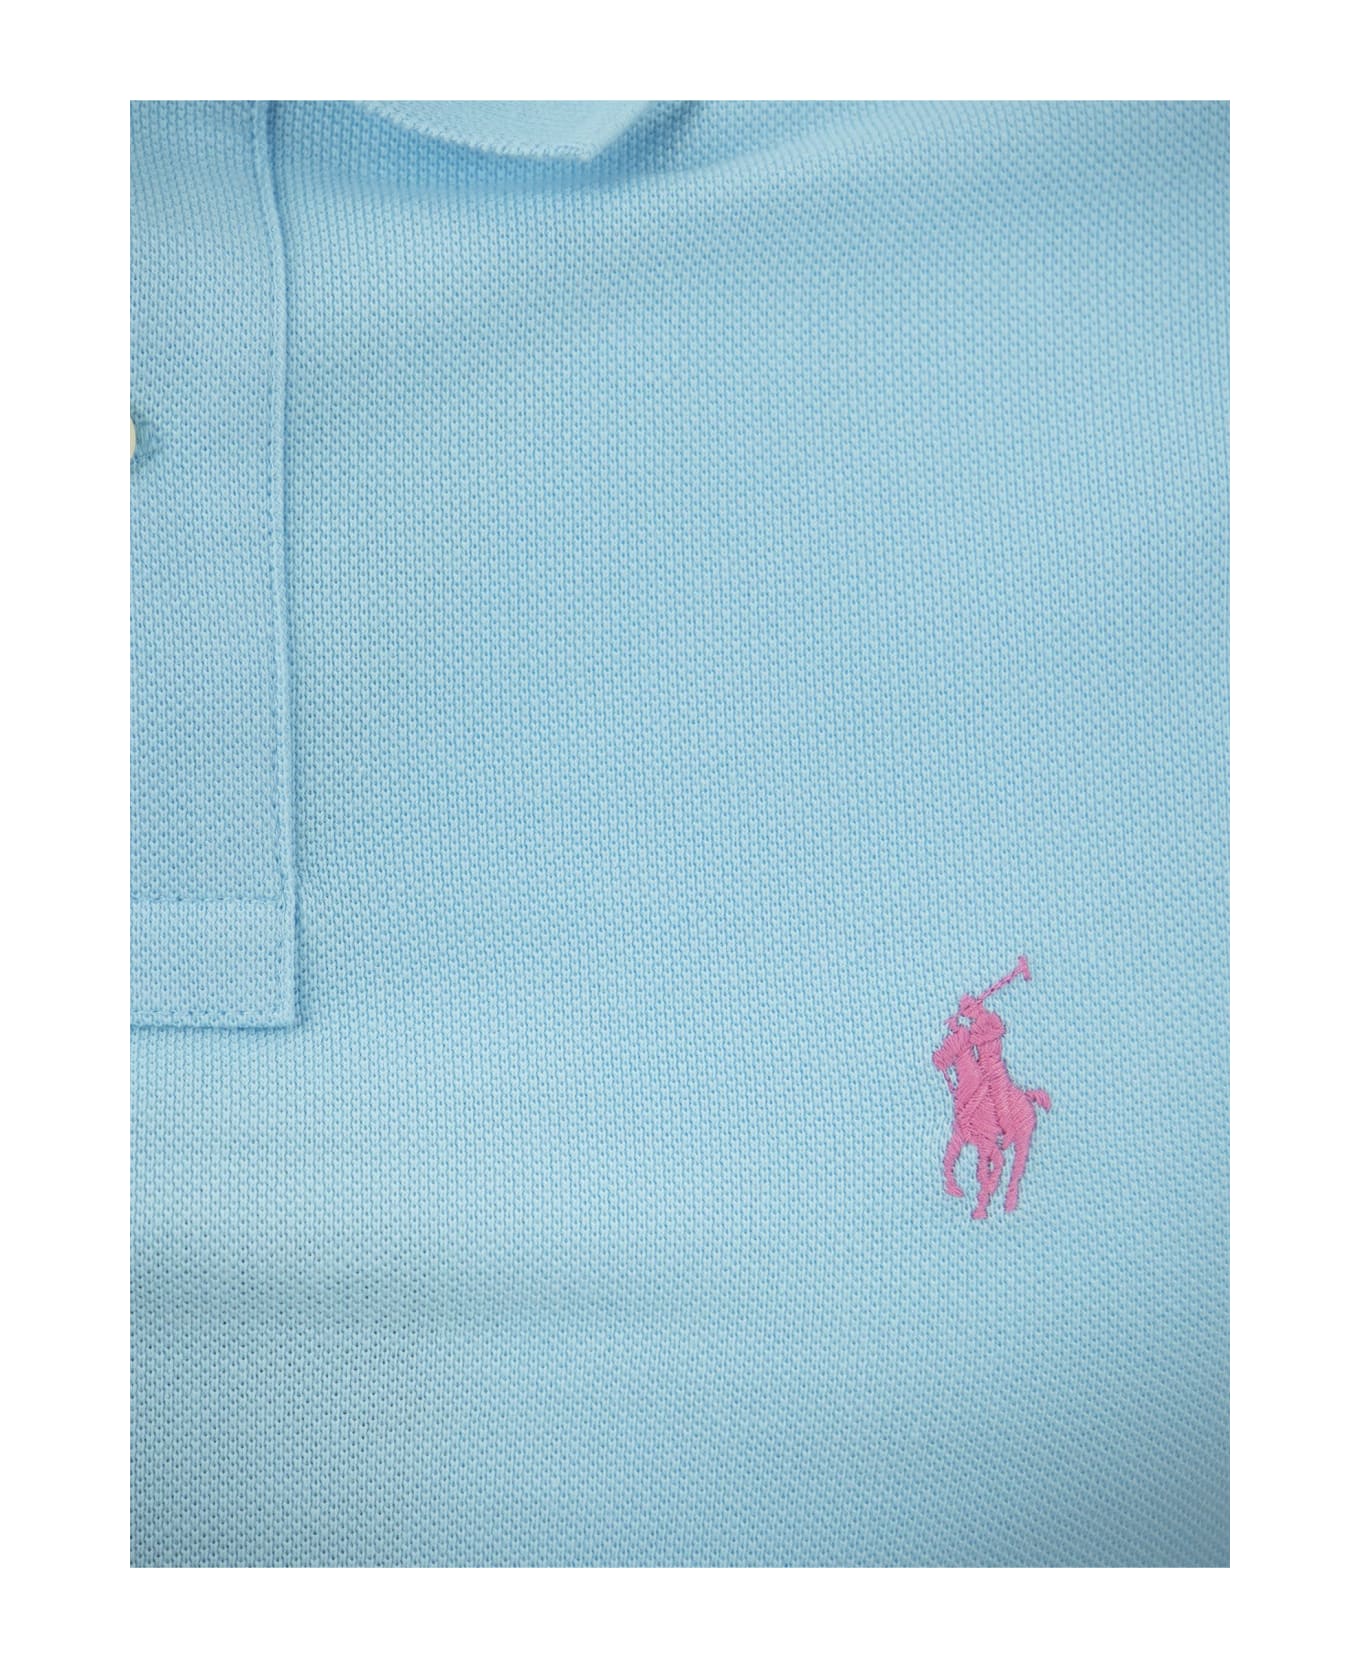 Polo Ralph Lauren Turquoise And Pink Slim-fit Piquet Polo Shirt - Blue ポロシャツ